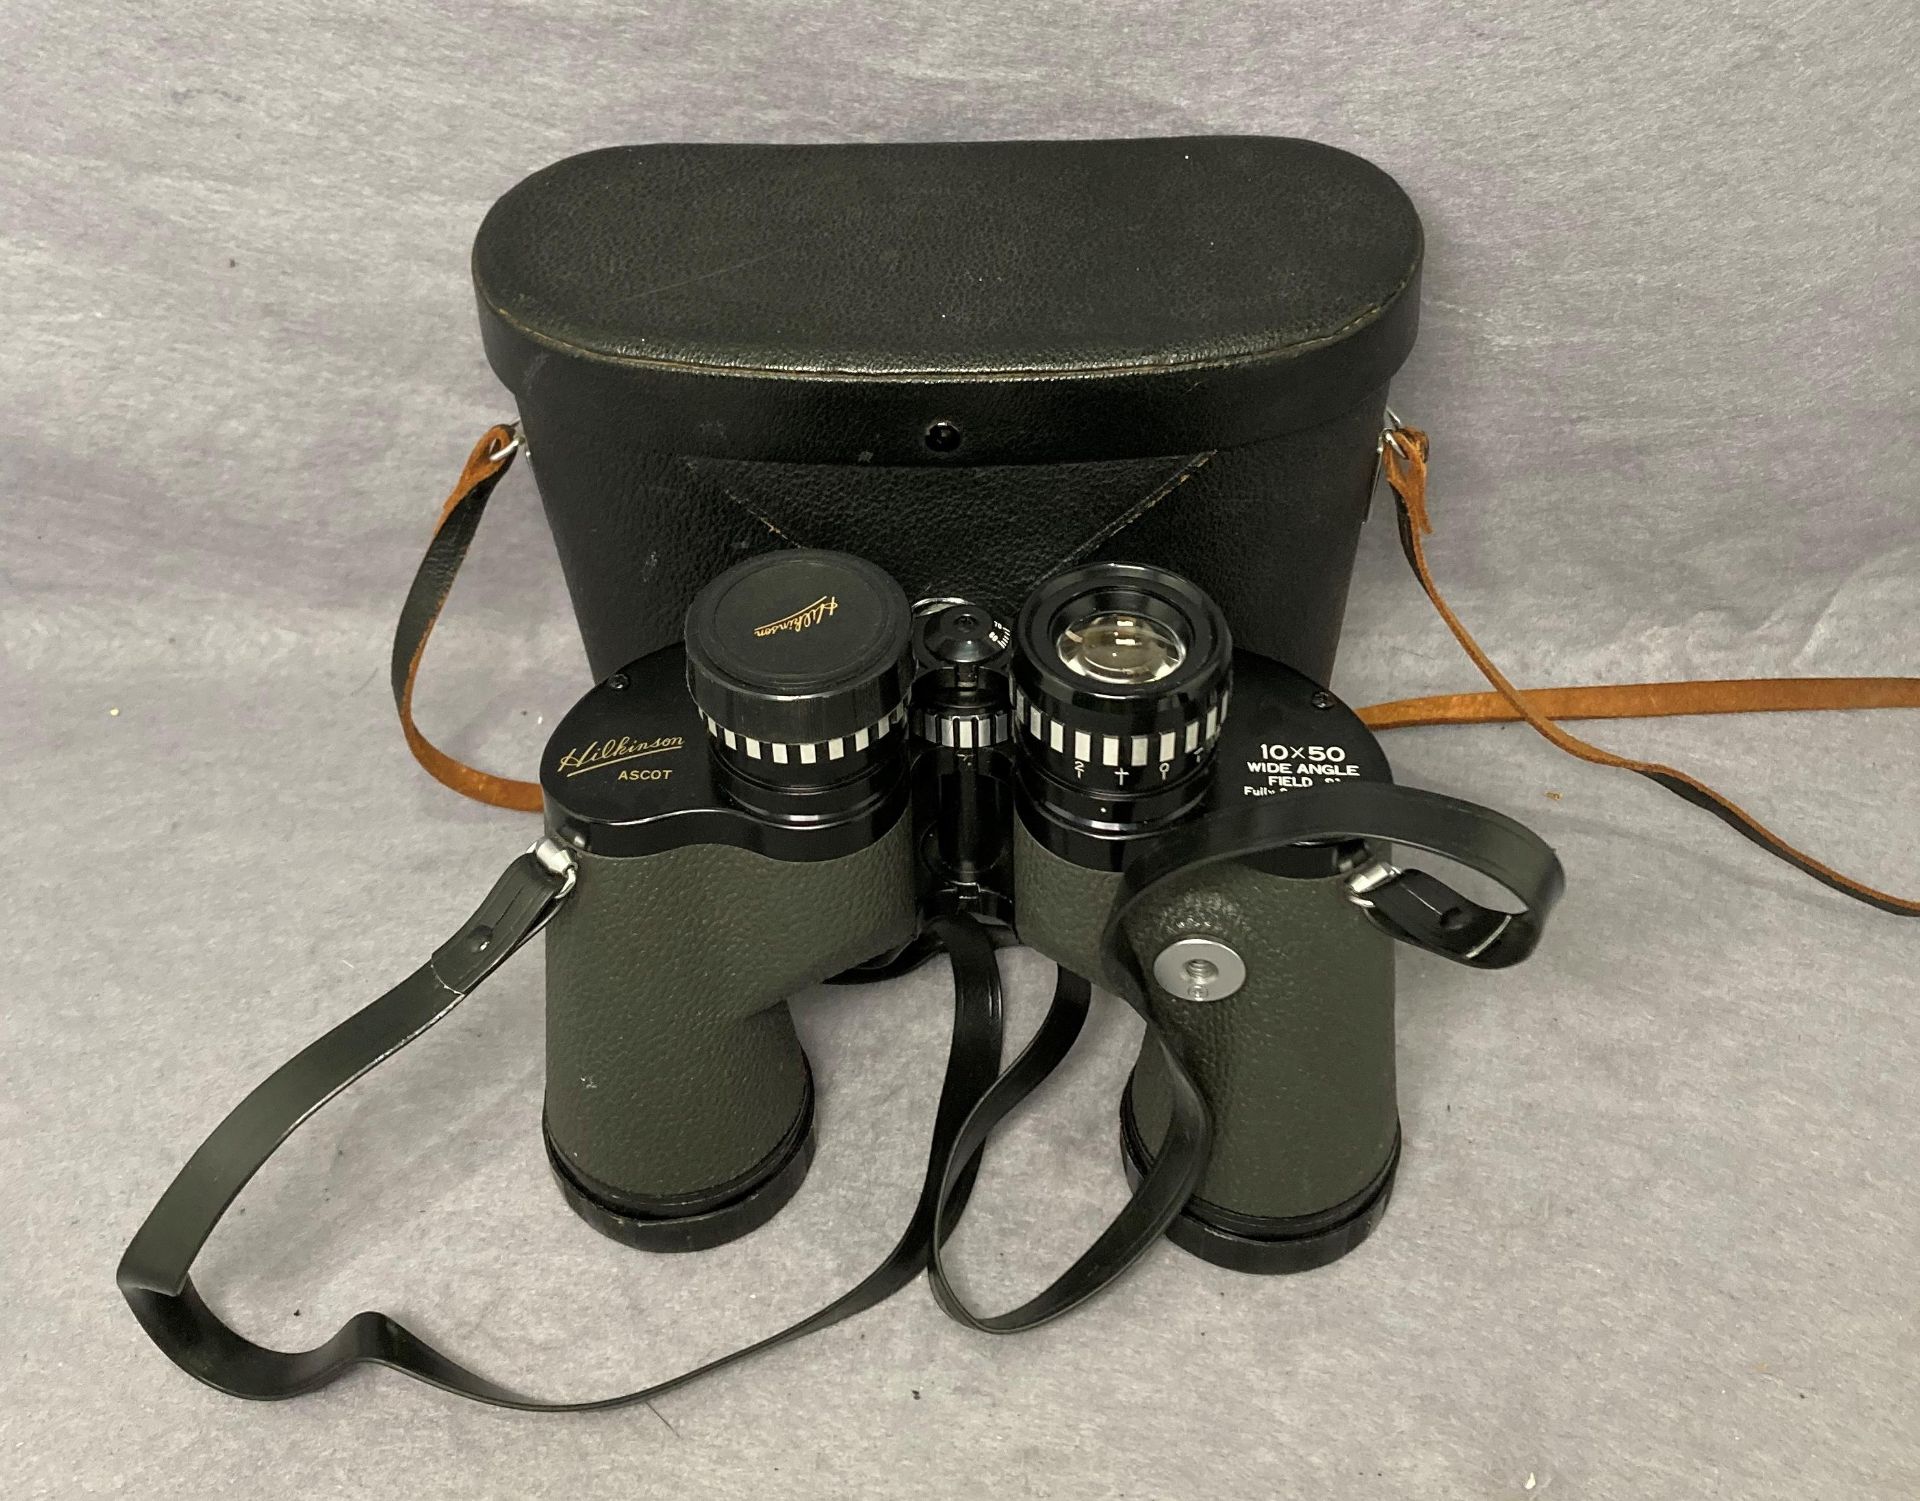 A pair of Mid Century Hilkinson Ascot 10x50 wide angle field 8° fully coated optics magnesium body